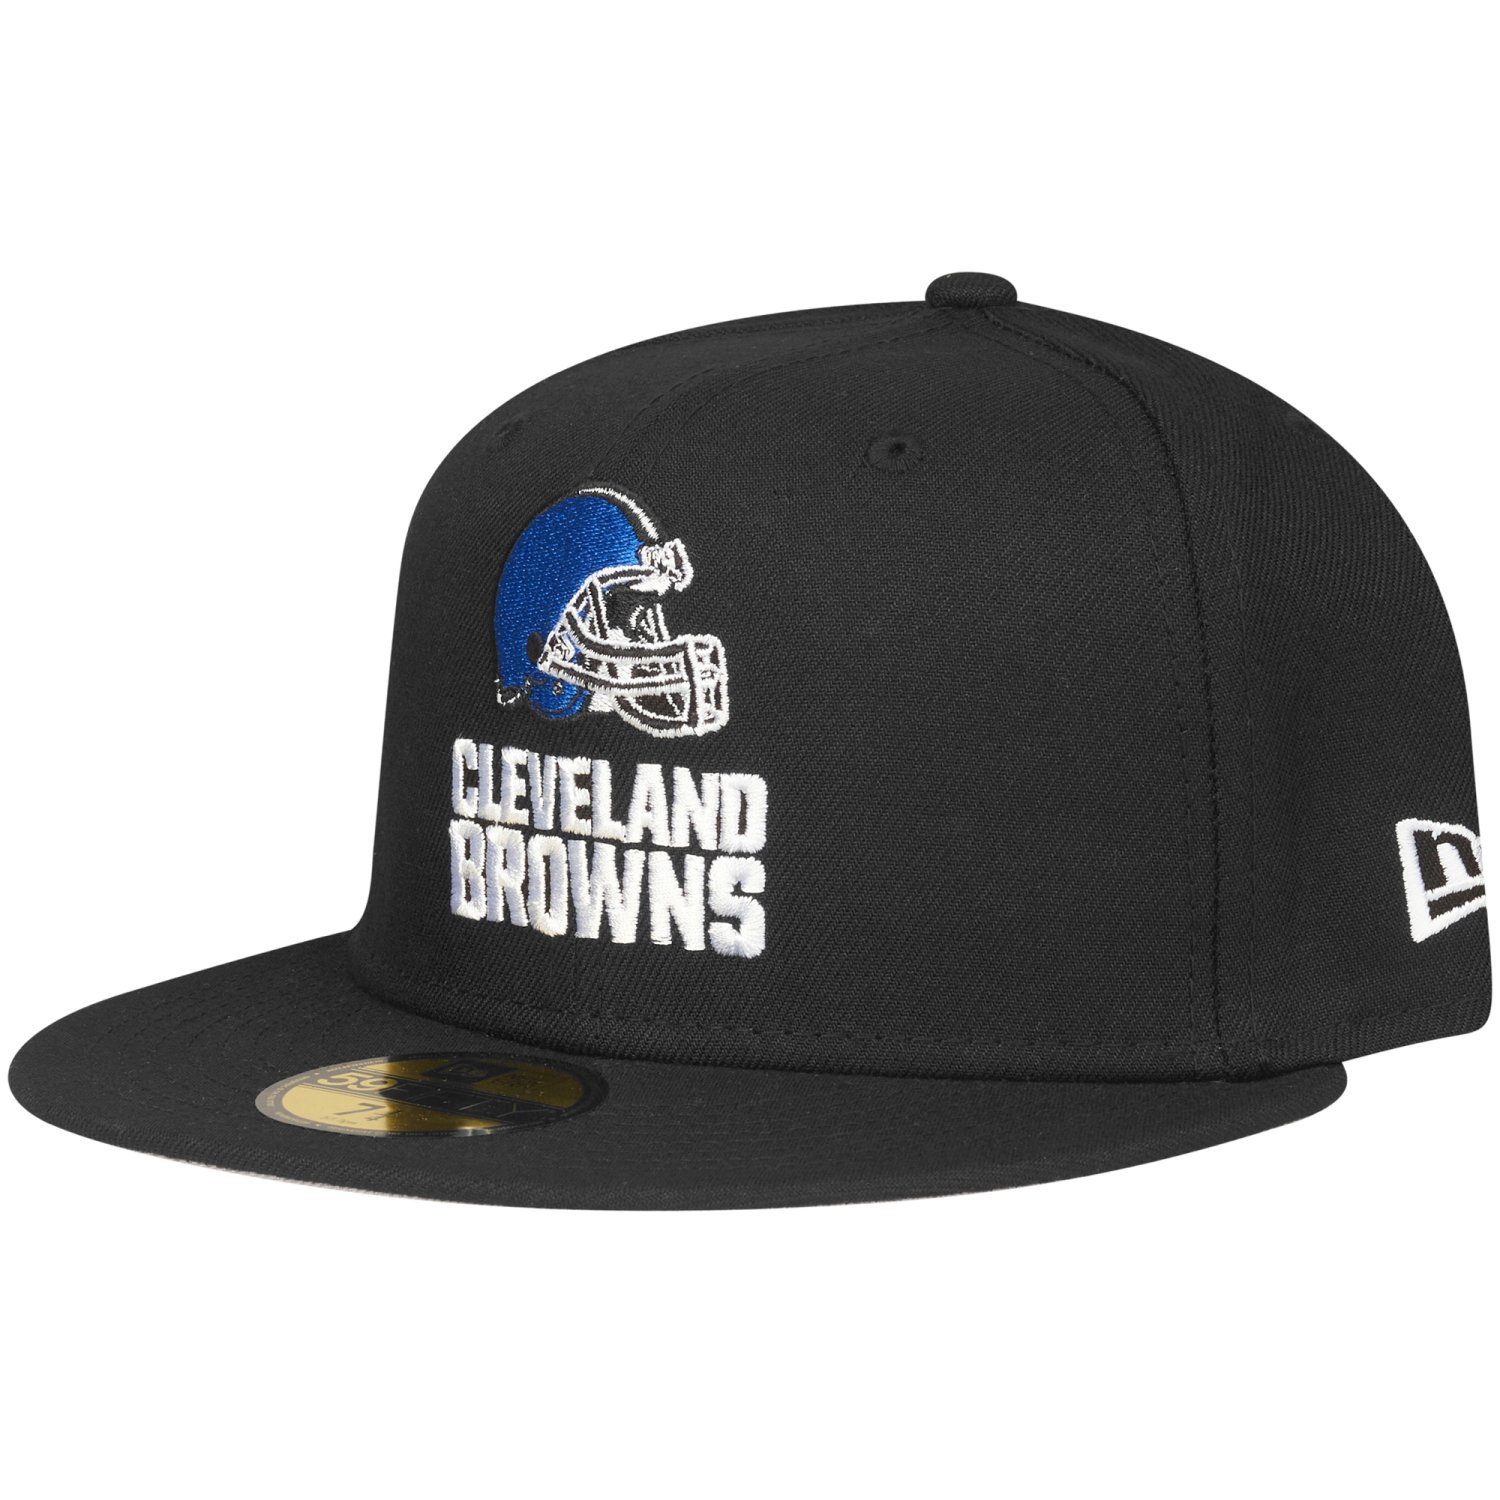 New Era Fitted Cap 59Fifty NFL TEAMS Cleveland Browns